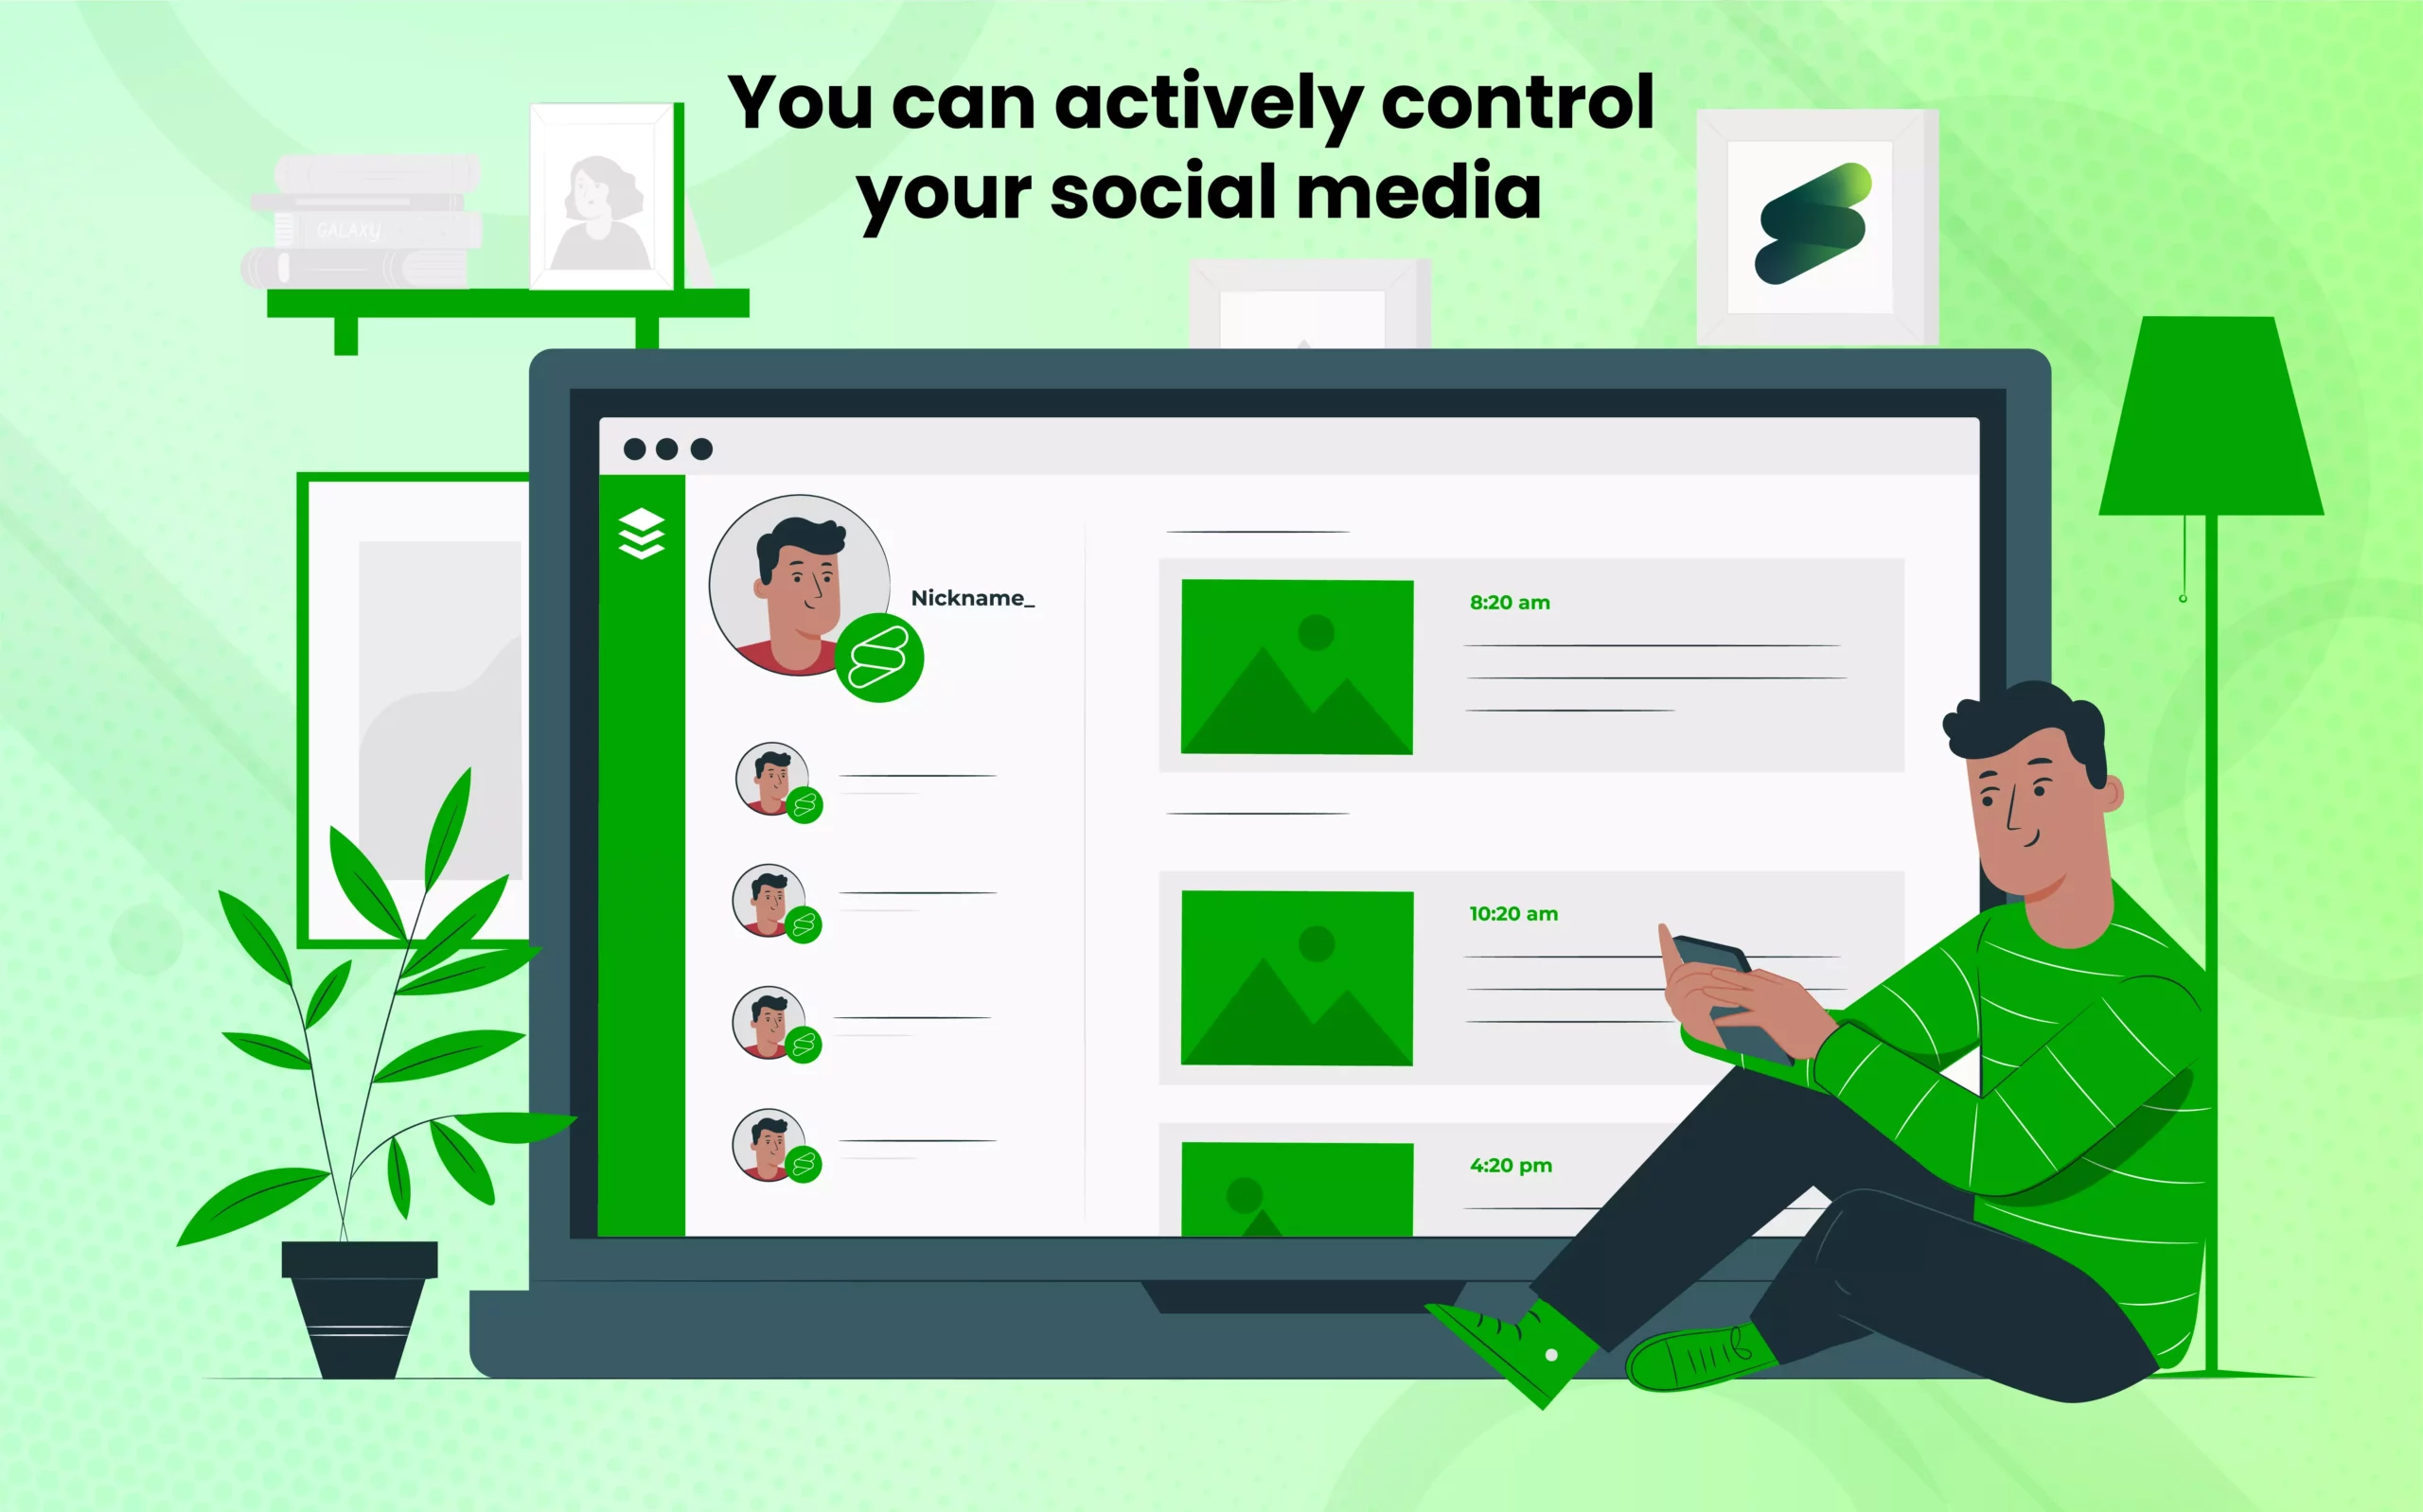 You can actively control your social media